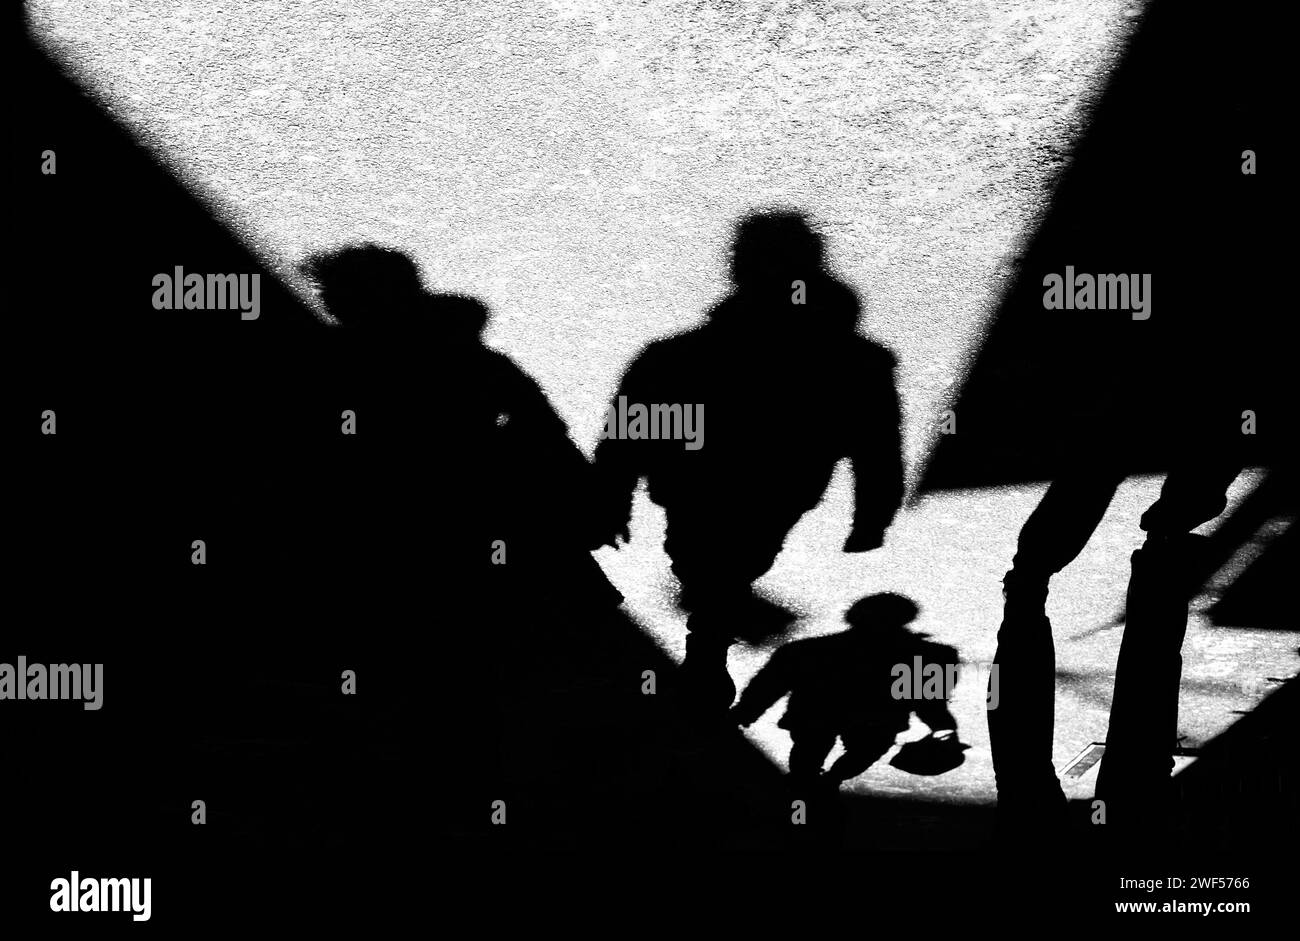 Shadow silhouette of unrecognizable people walking  in alley street, in black and white Stock Photo